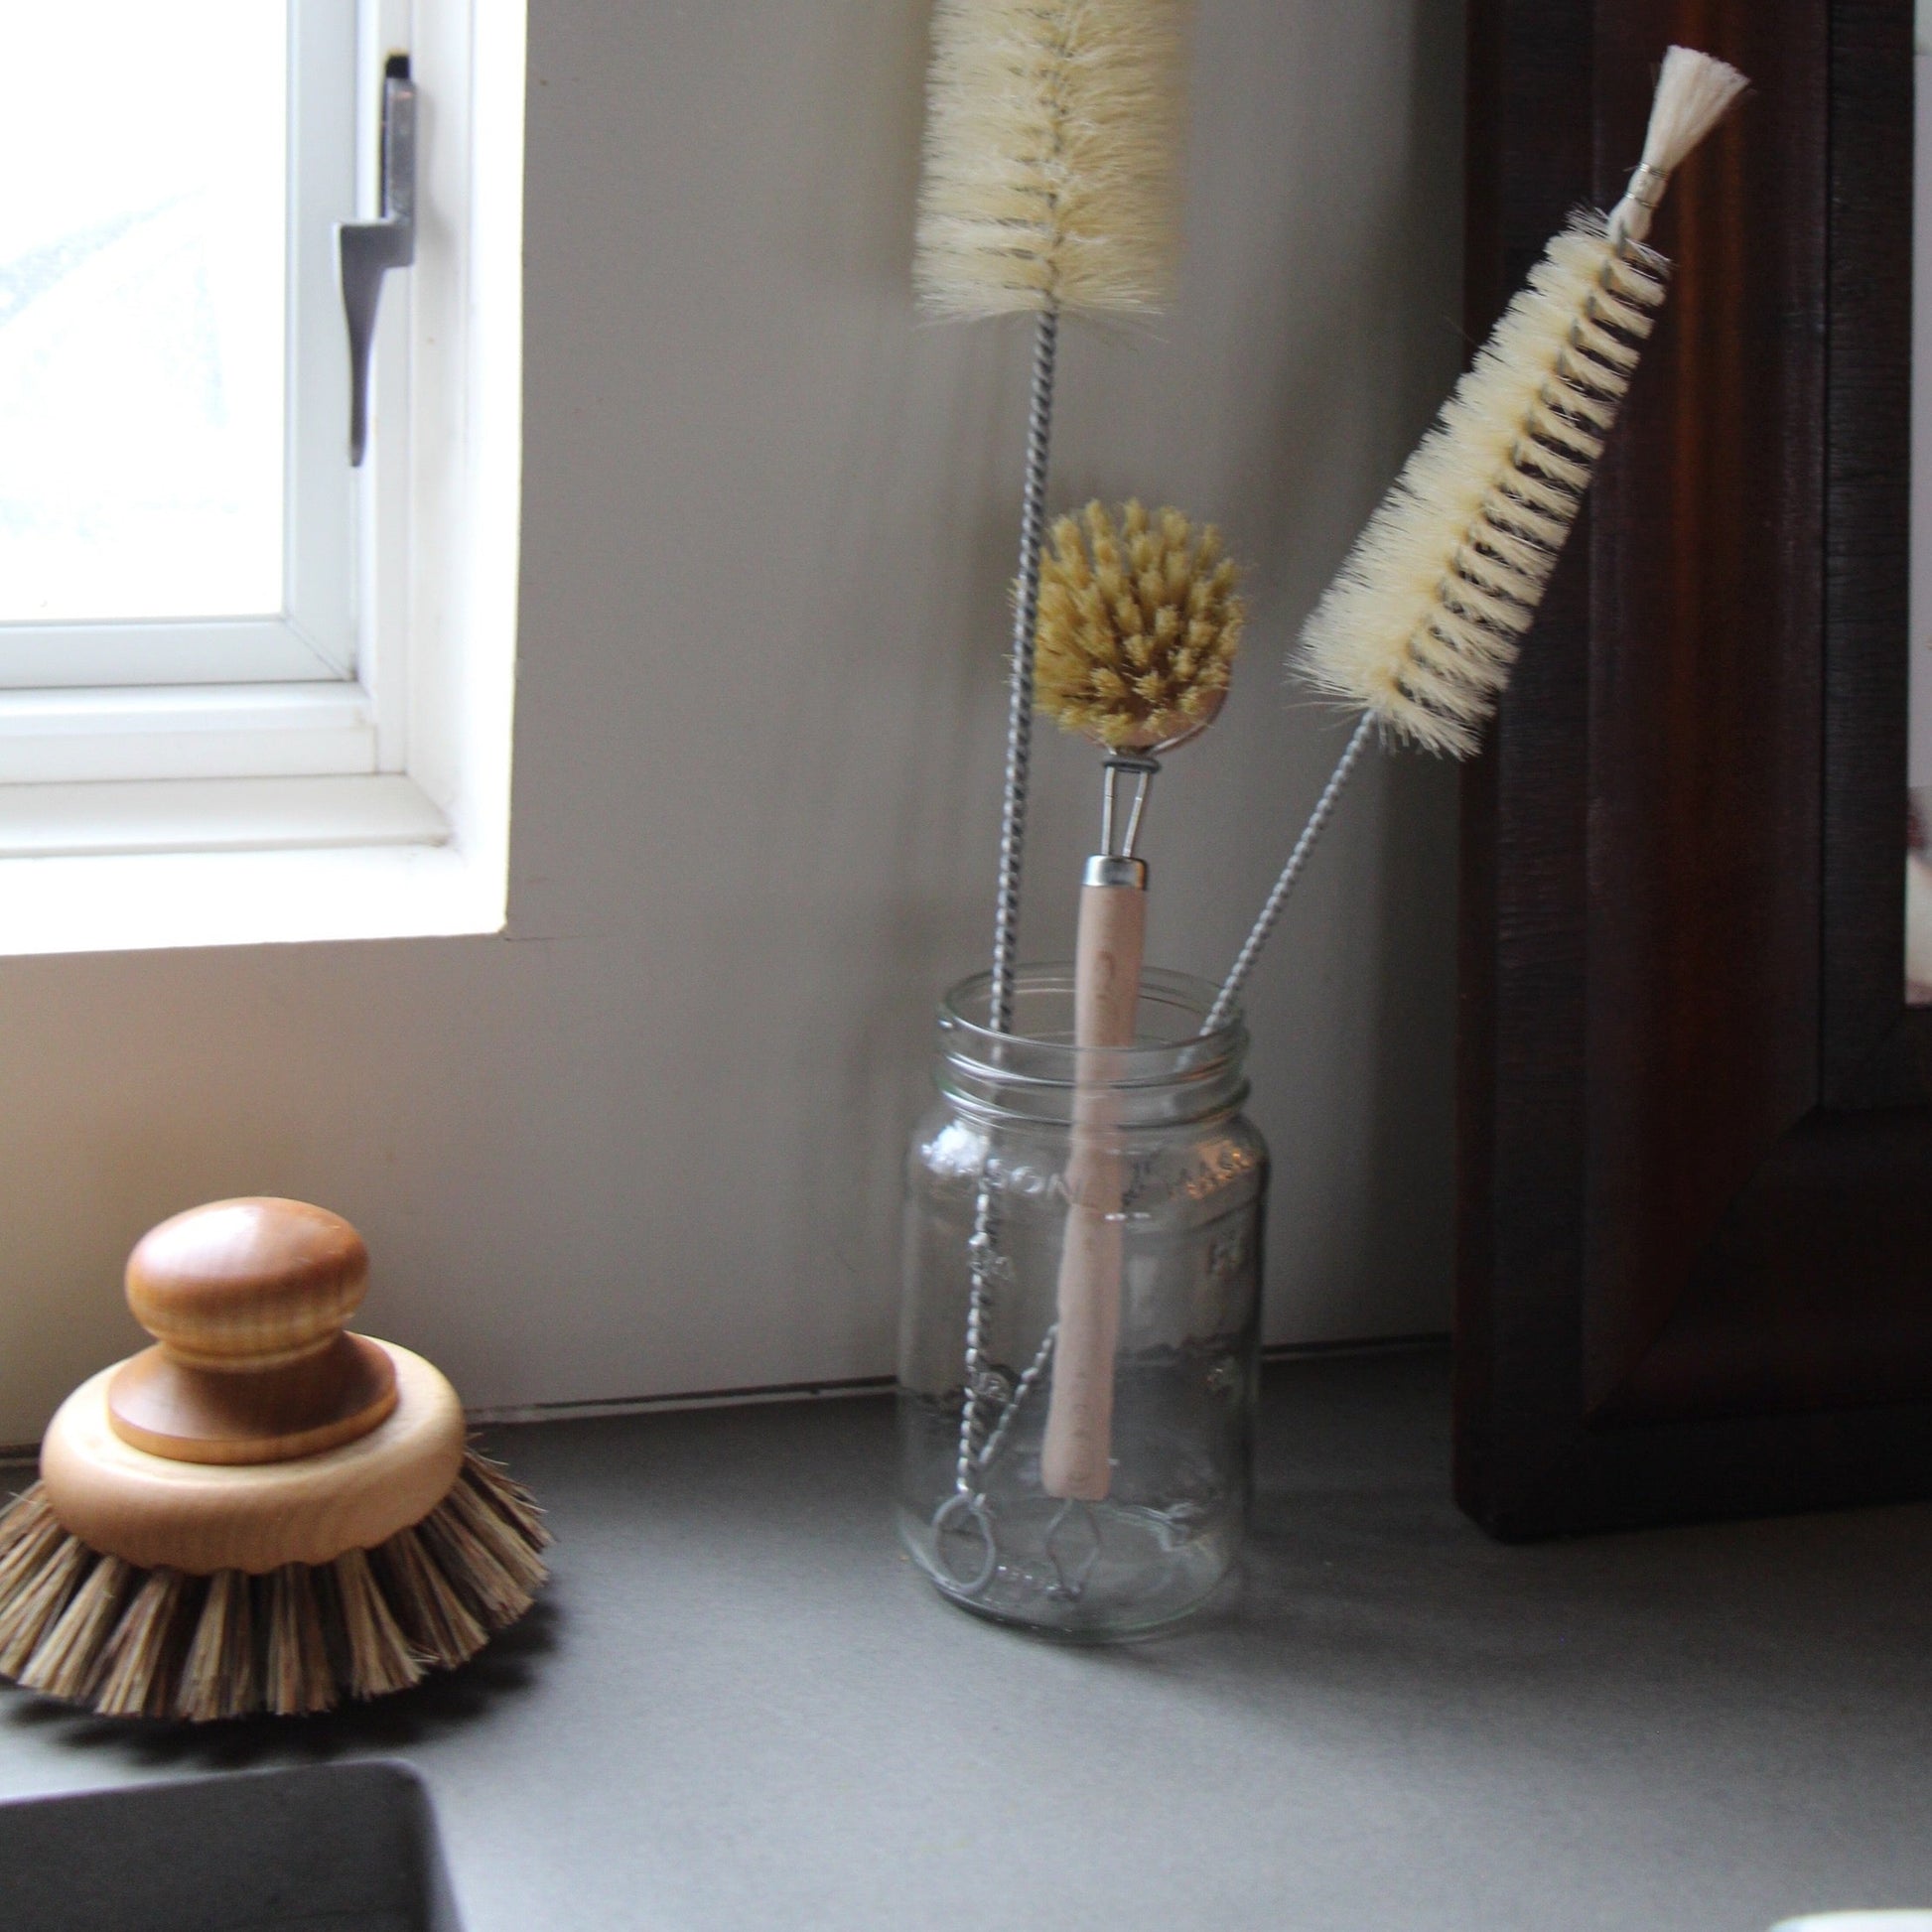 Sturdy brush for pots and pans with round maple handle and natural bristles, shown with several dish and glass brushes